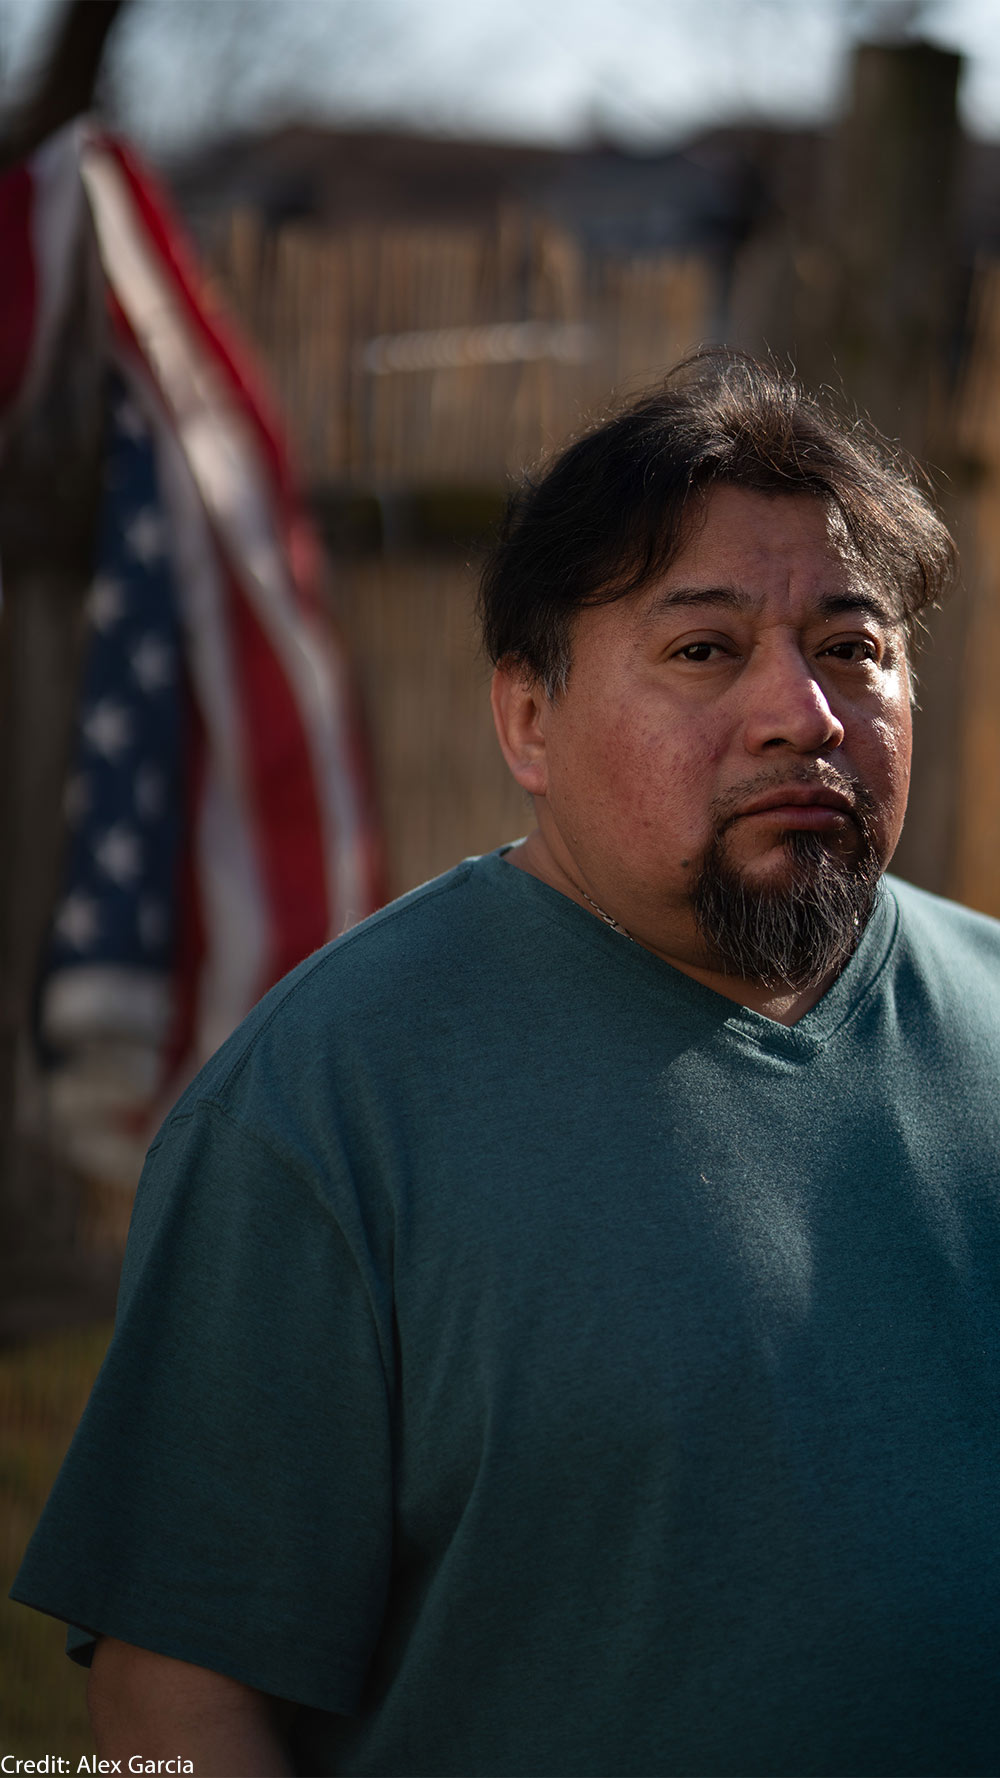 Margarito Casta​​ñon Nava looks into the camera as an American flag hangs from a wooden fence behind him.